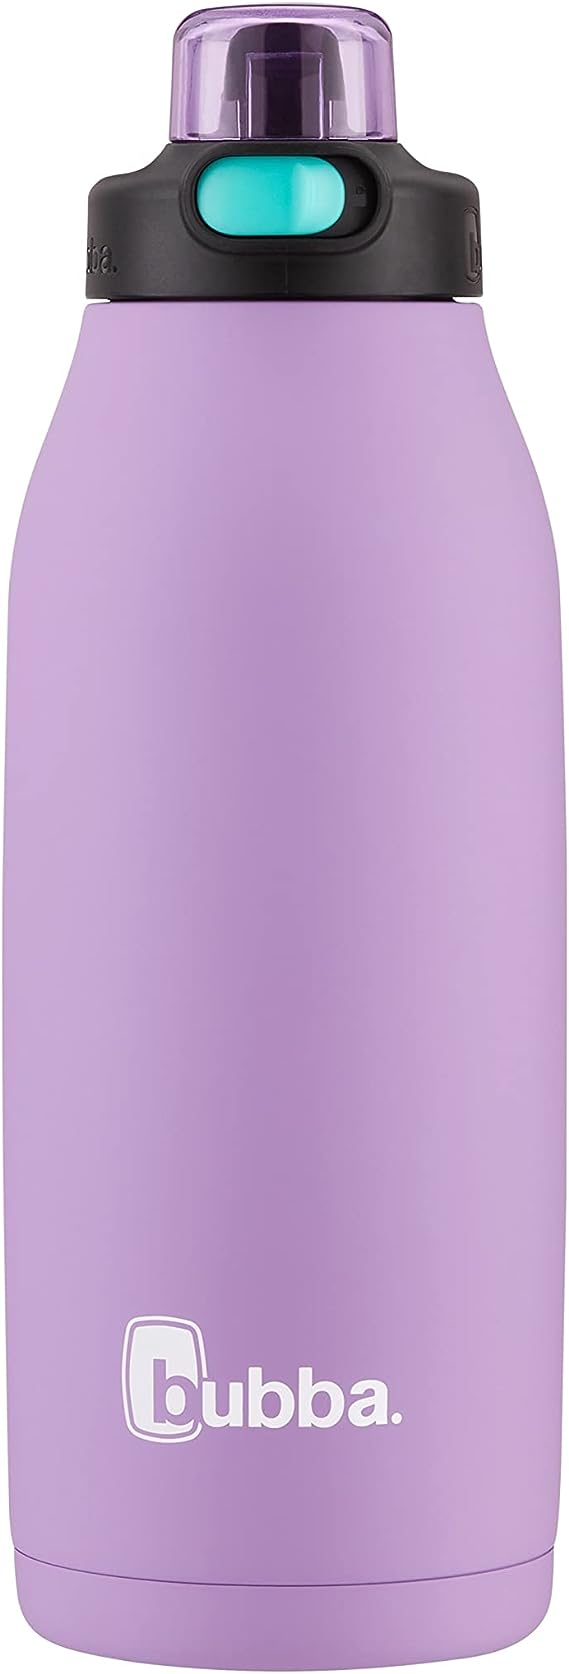 Bubba Radiant Vacuum-Insulated Stainless Steel Water Bottle with Leak-Proof Lid and Straw, Rubberized Water Bottle with Push-Button Straw Lid, Keeps Drinks Cold up to 12 Hours, 40oz Dark Lavender